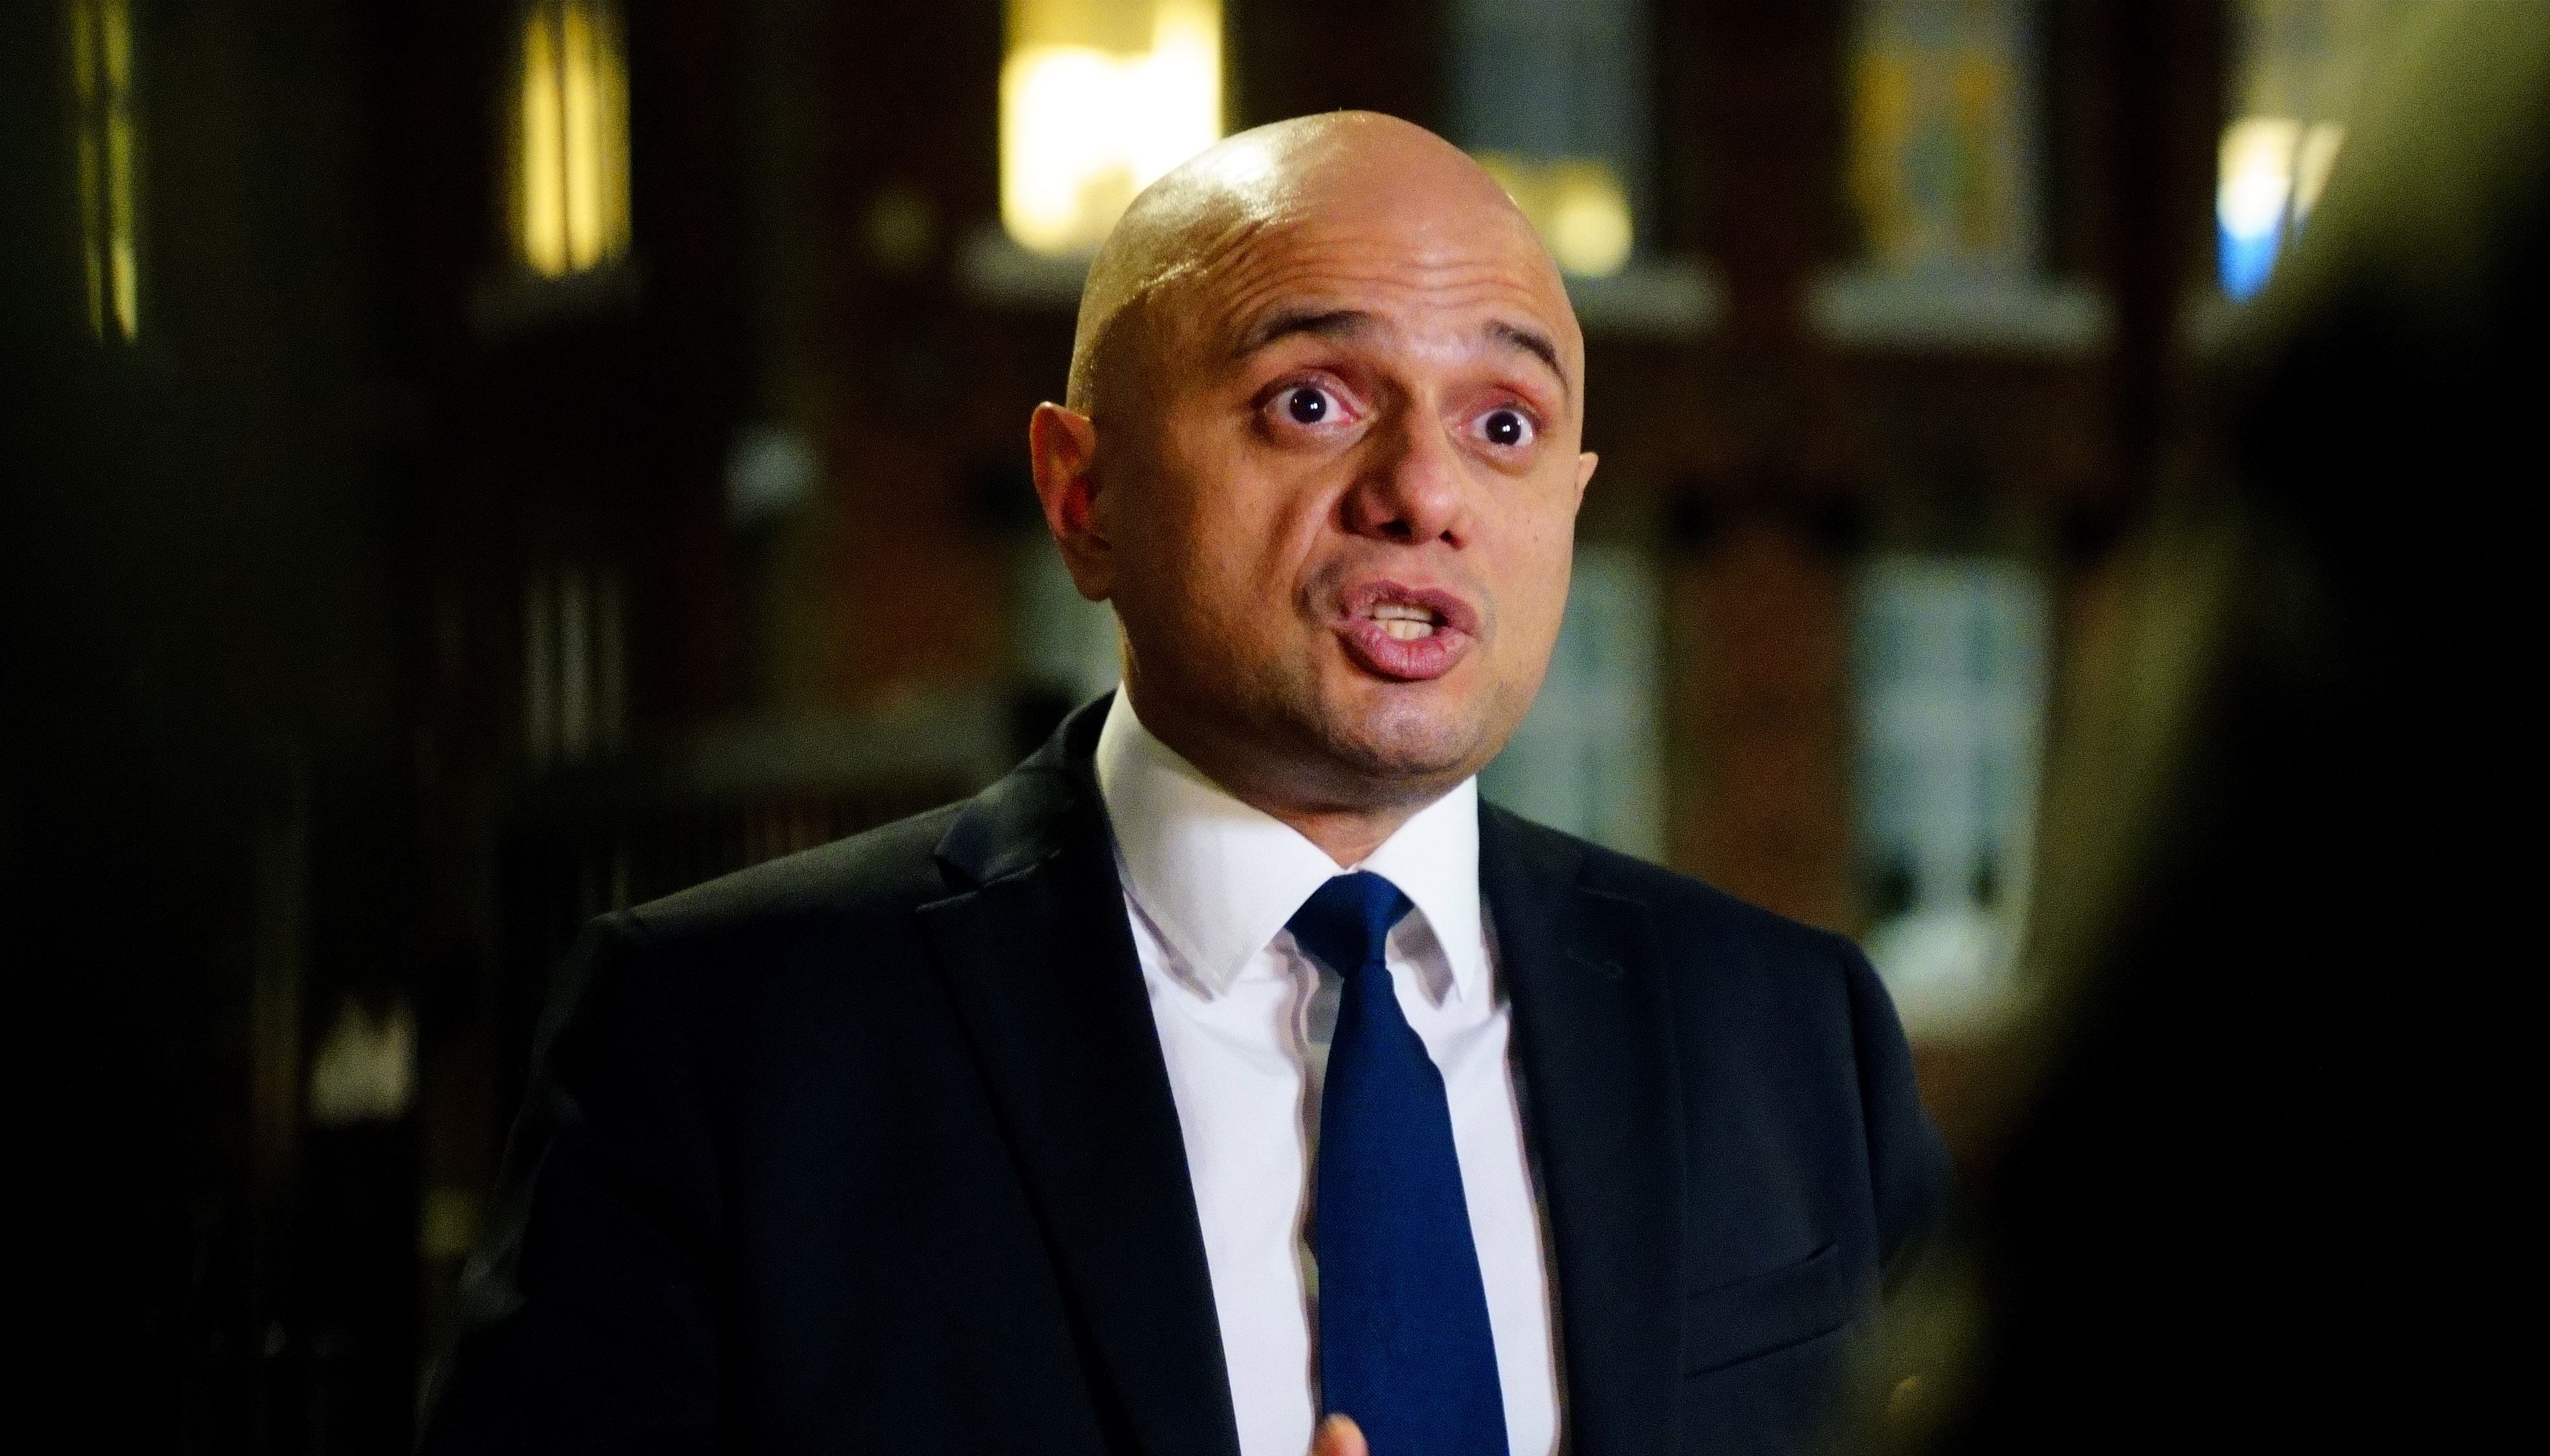 Health Secretary Sajid Javid, supports the changes that have been suggested